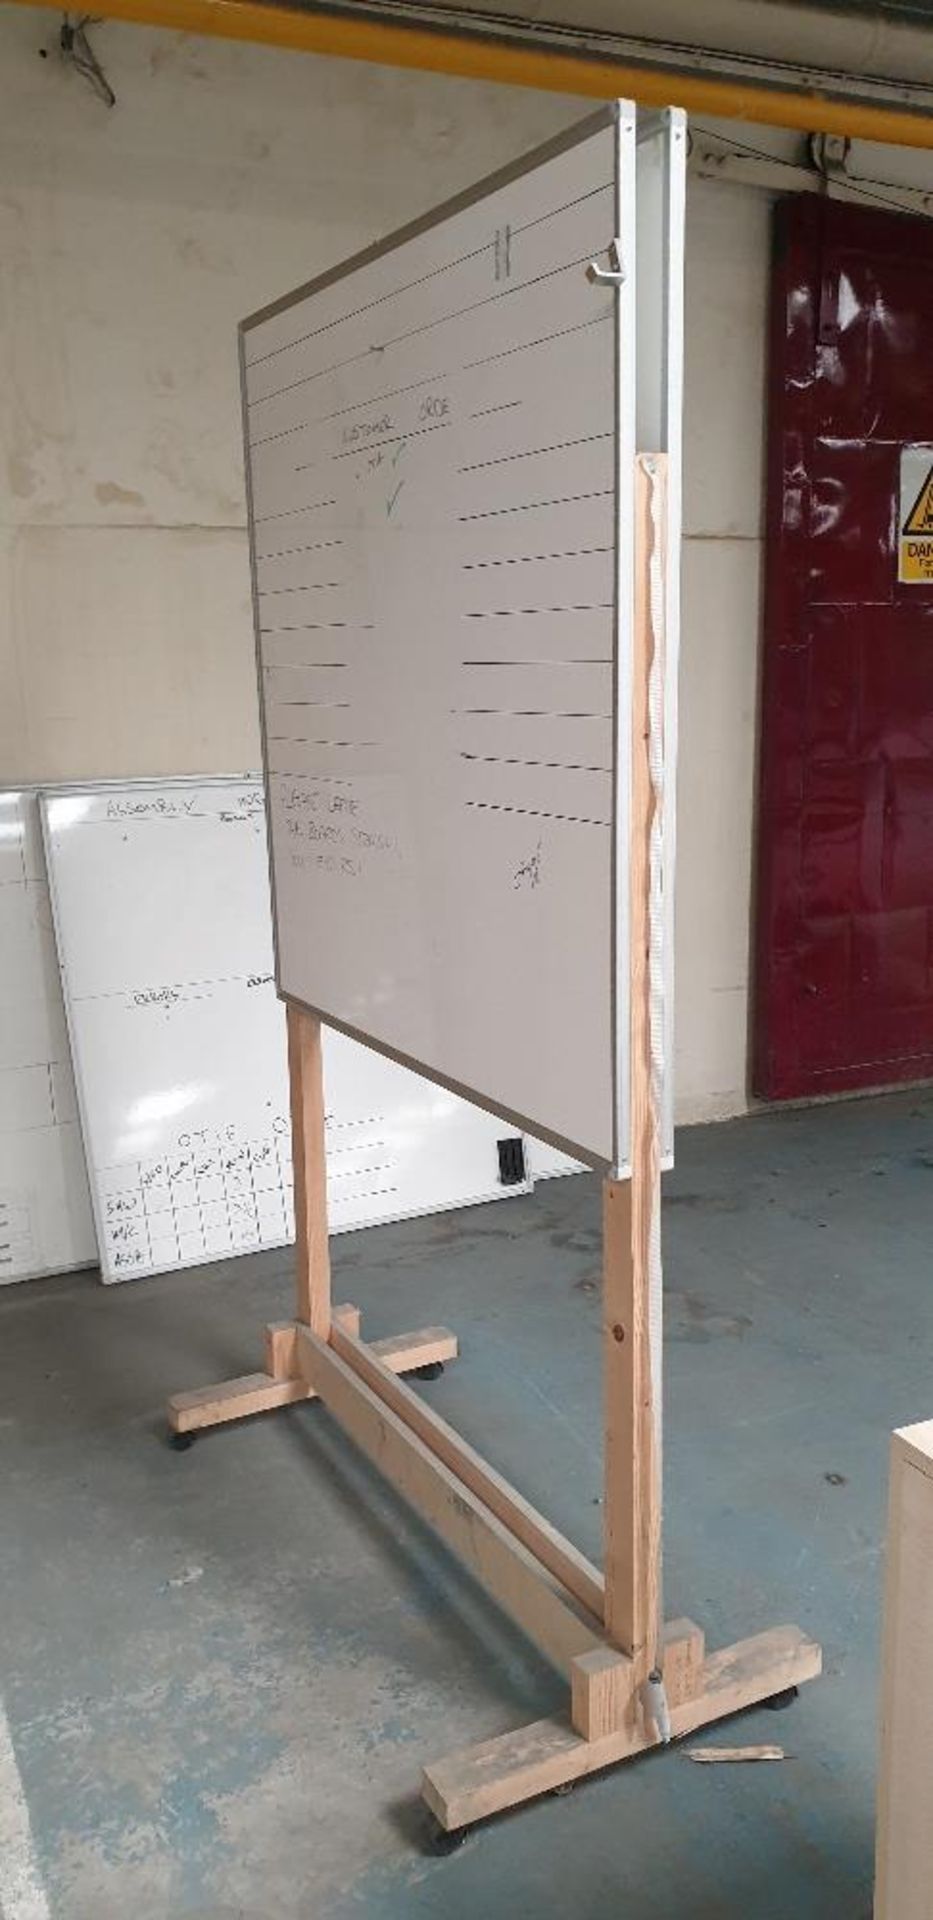 Mobile double sided dry wipe boards - Image 2 of 2